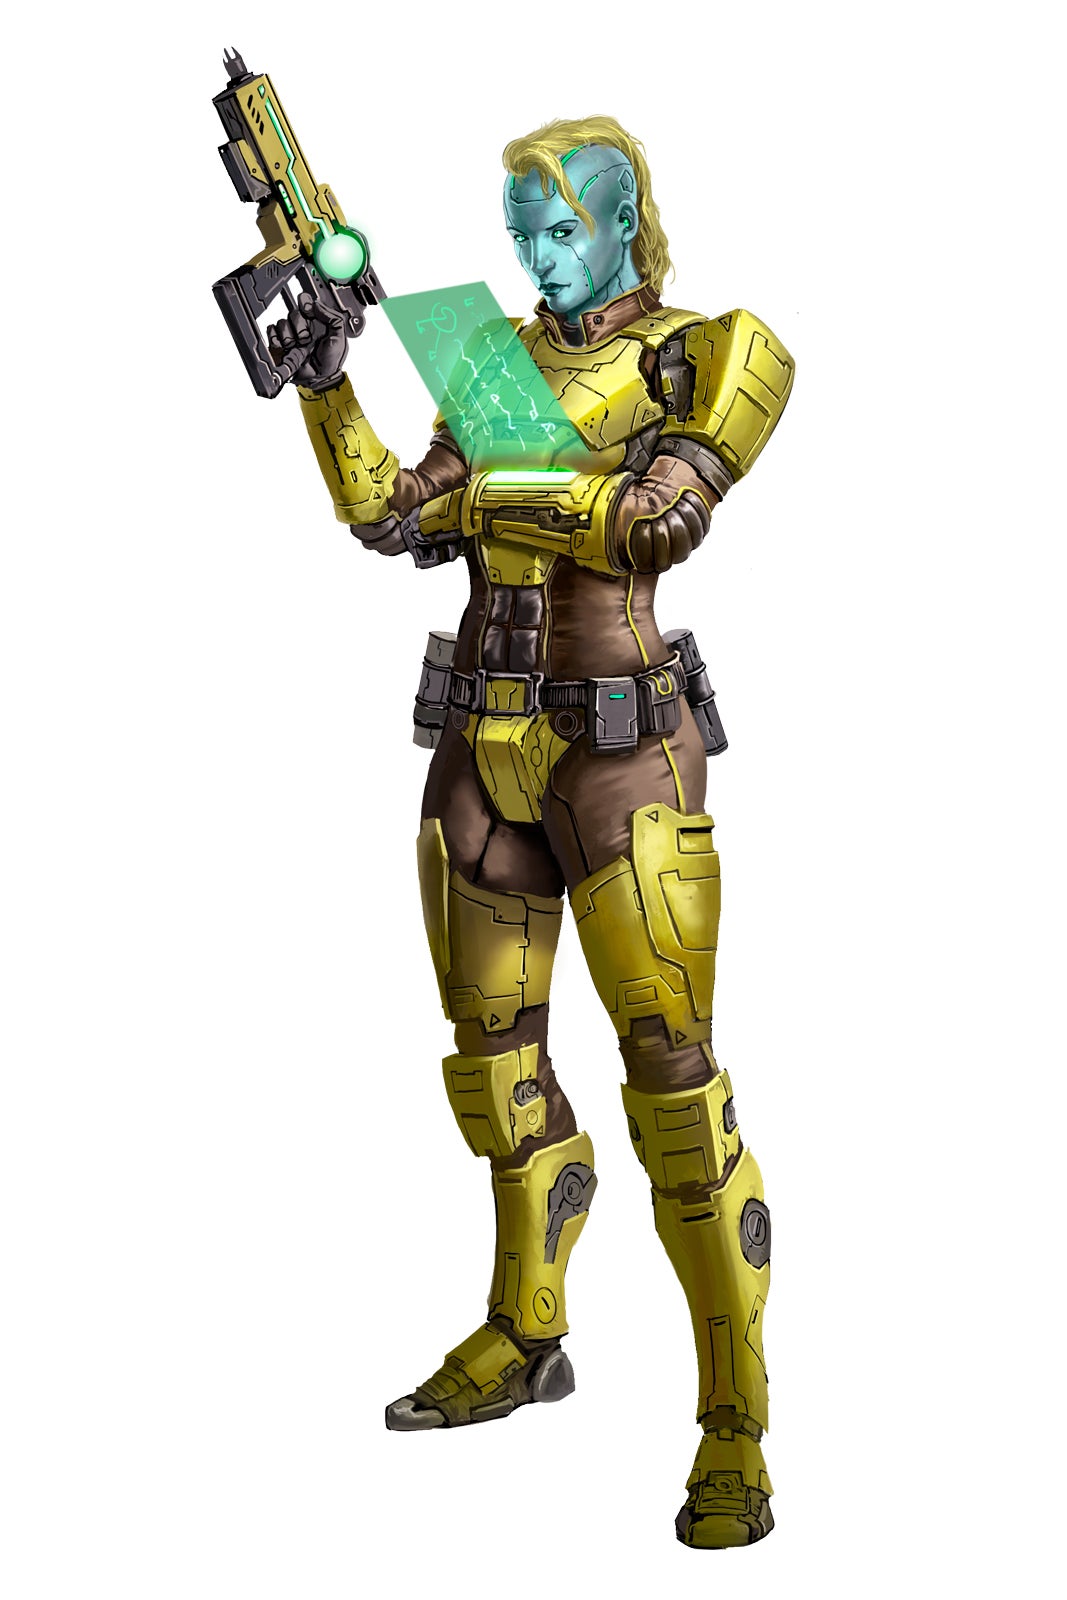 An android with a mohawk wearing bright yellow armor reads a digital display coming out of their bracer